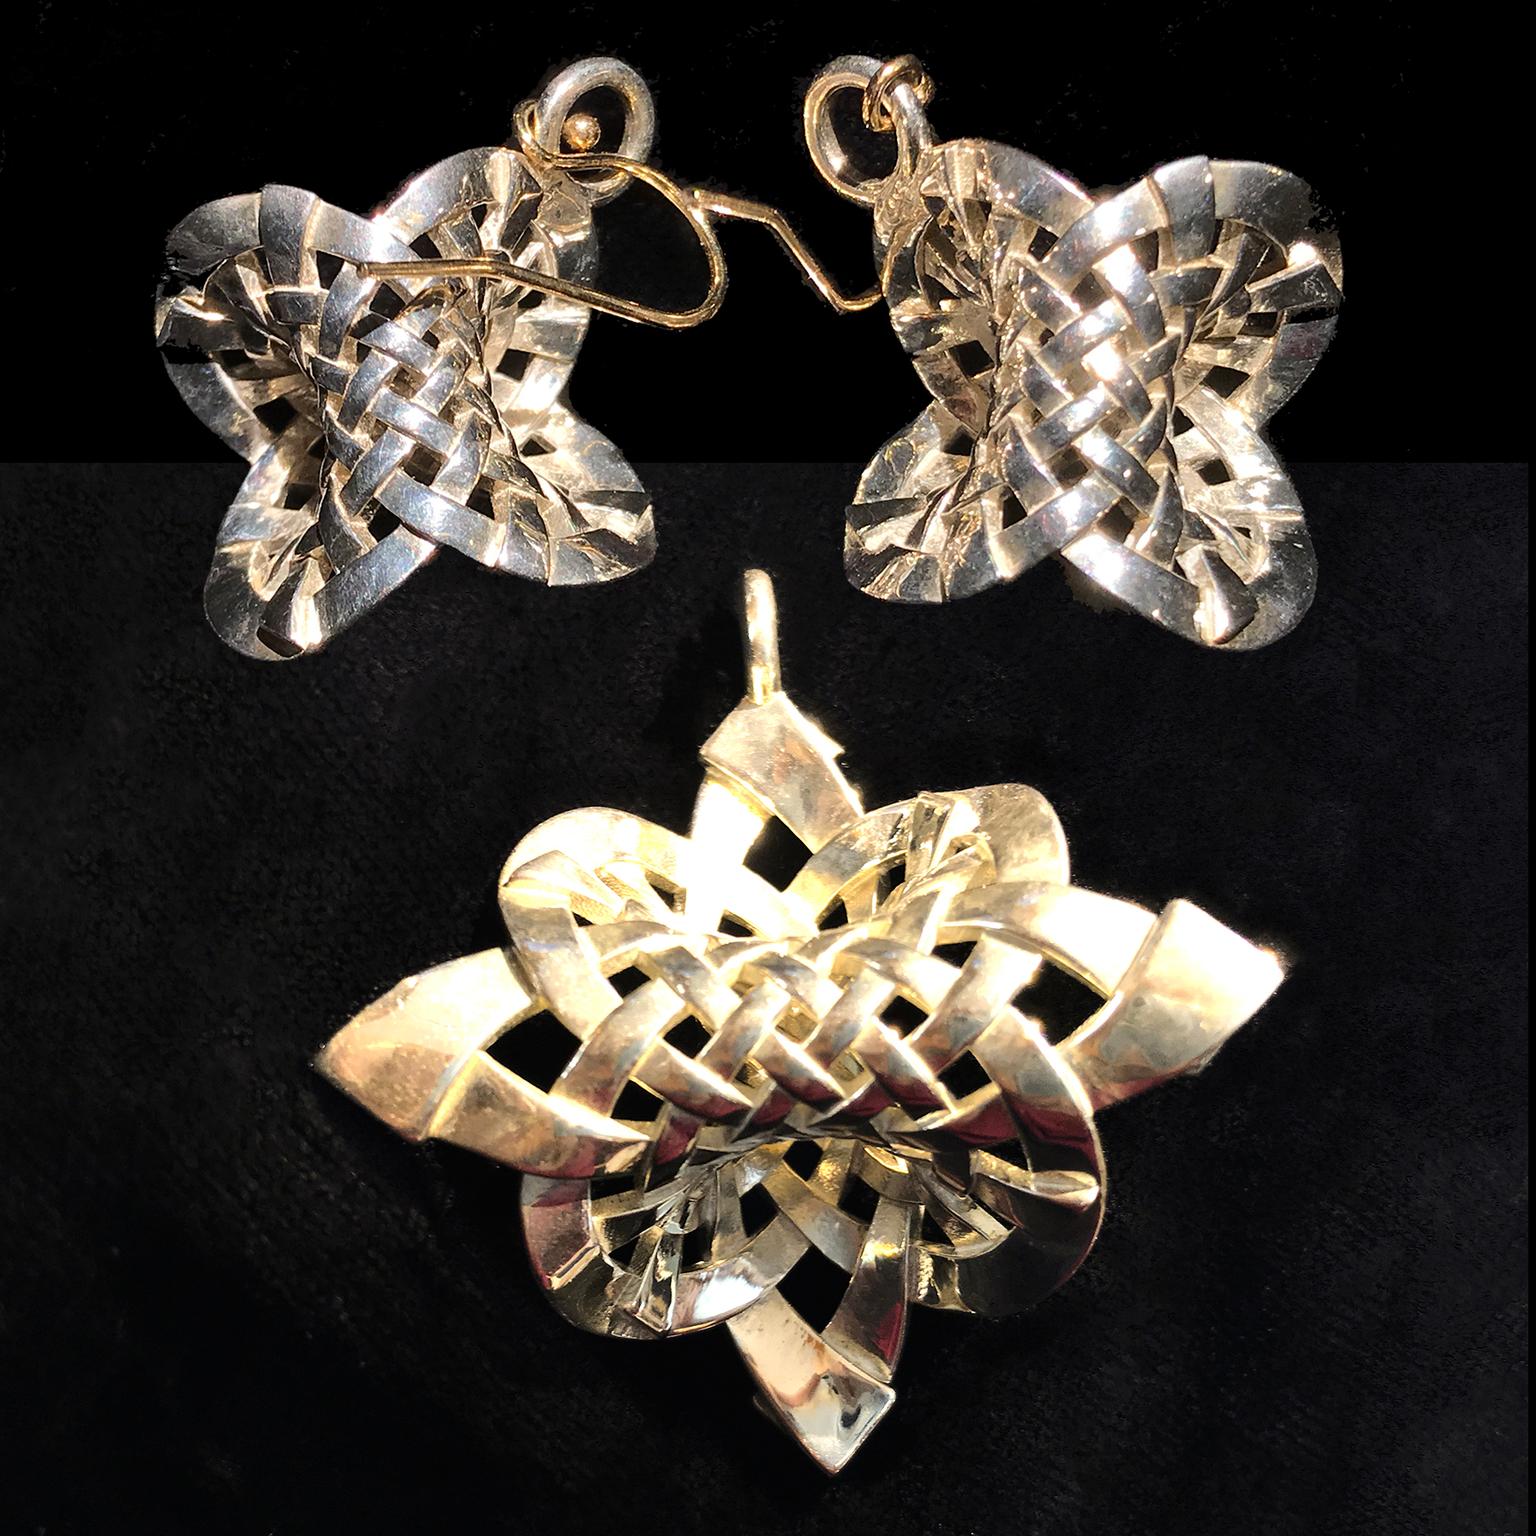 Image for entry 'Woven Hopf Fibrations jewelry'